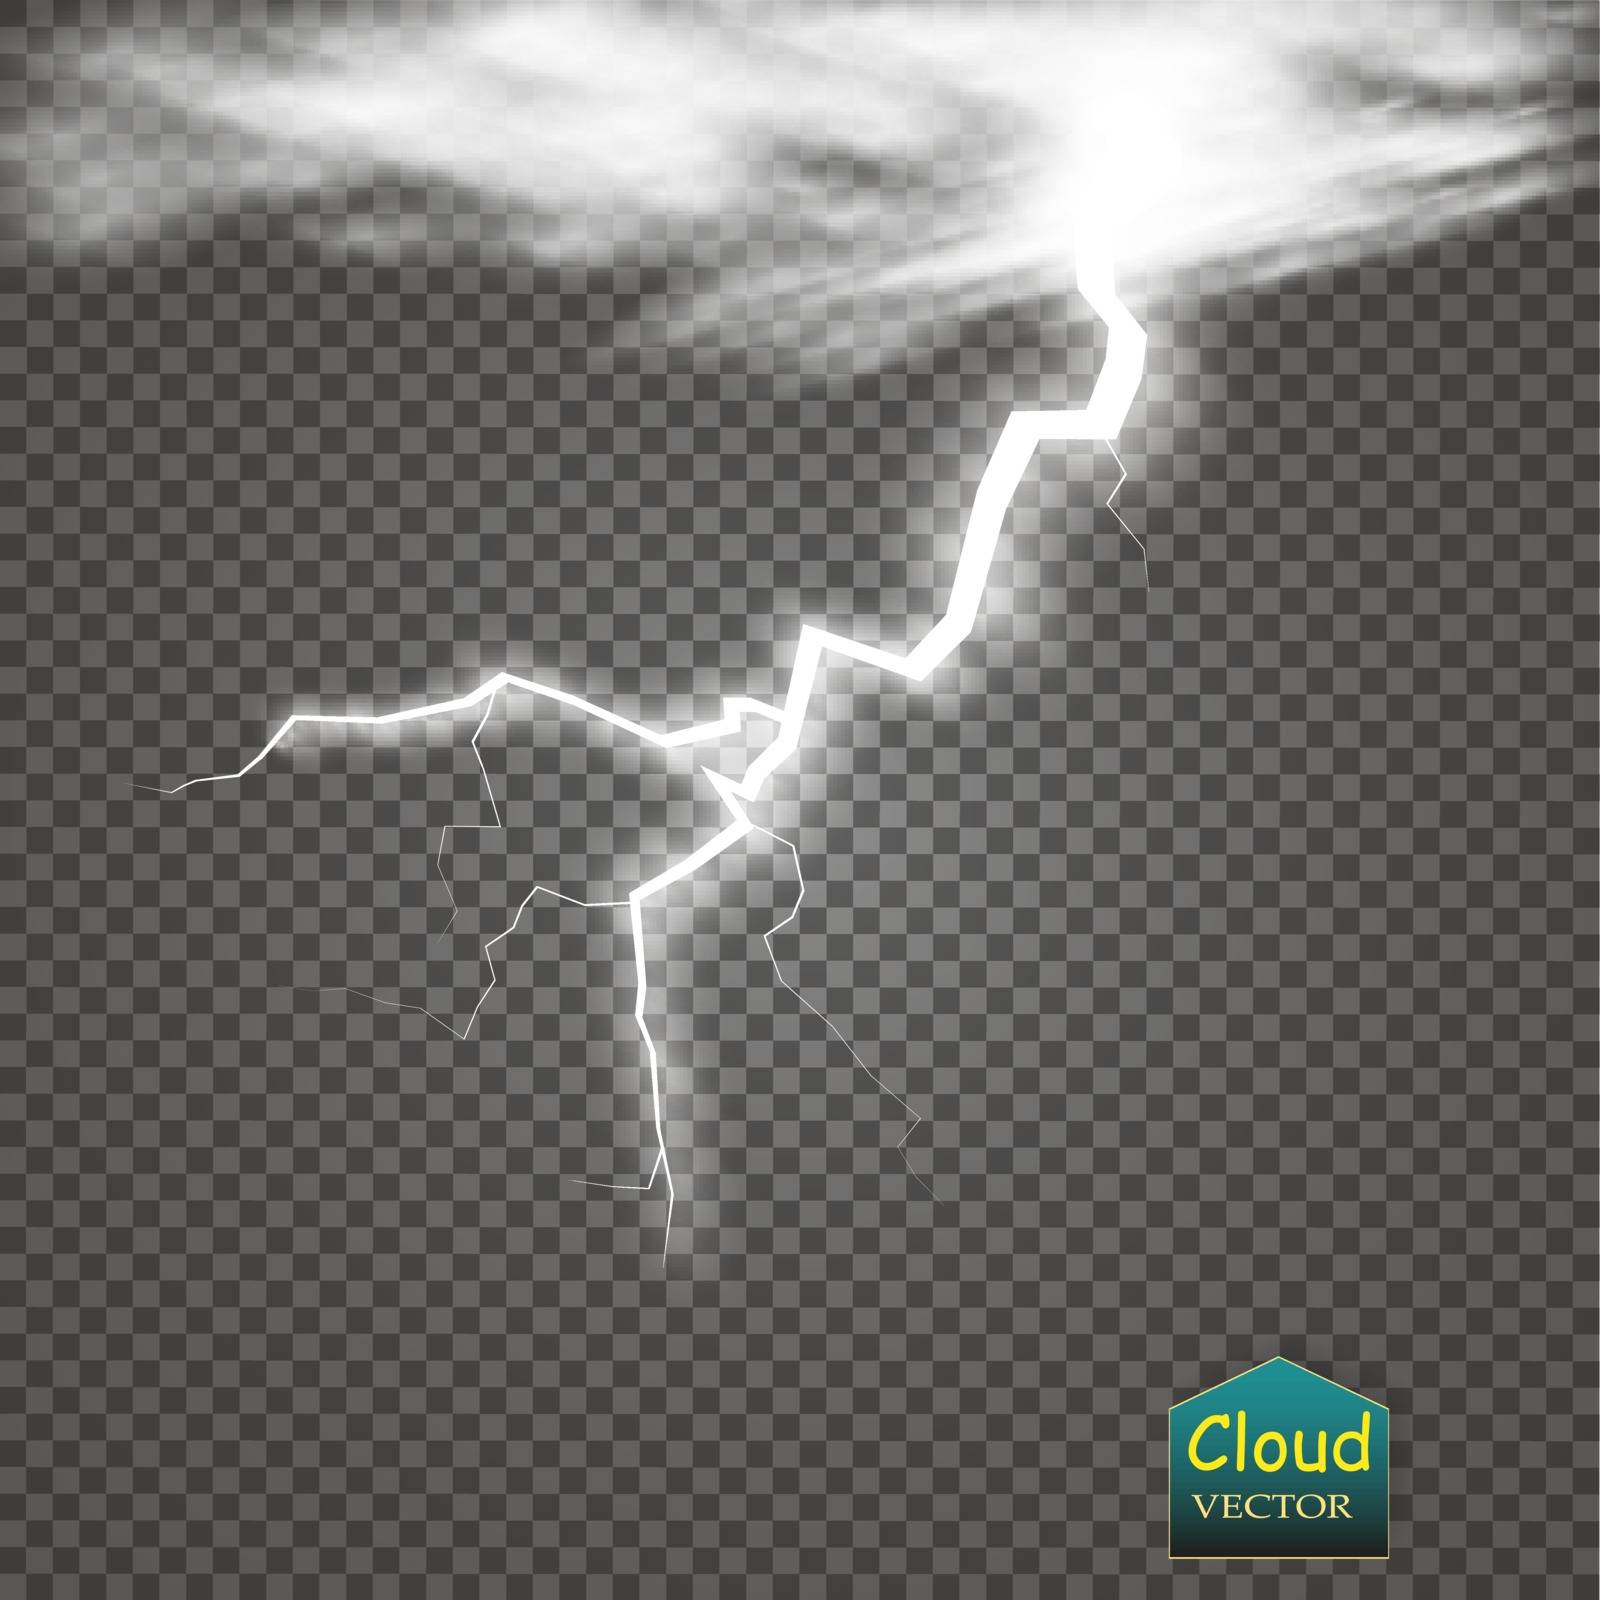 Storm and Lightning with rain and white cloud isolated on transparent background. Vector